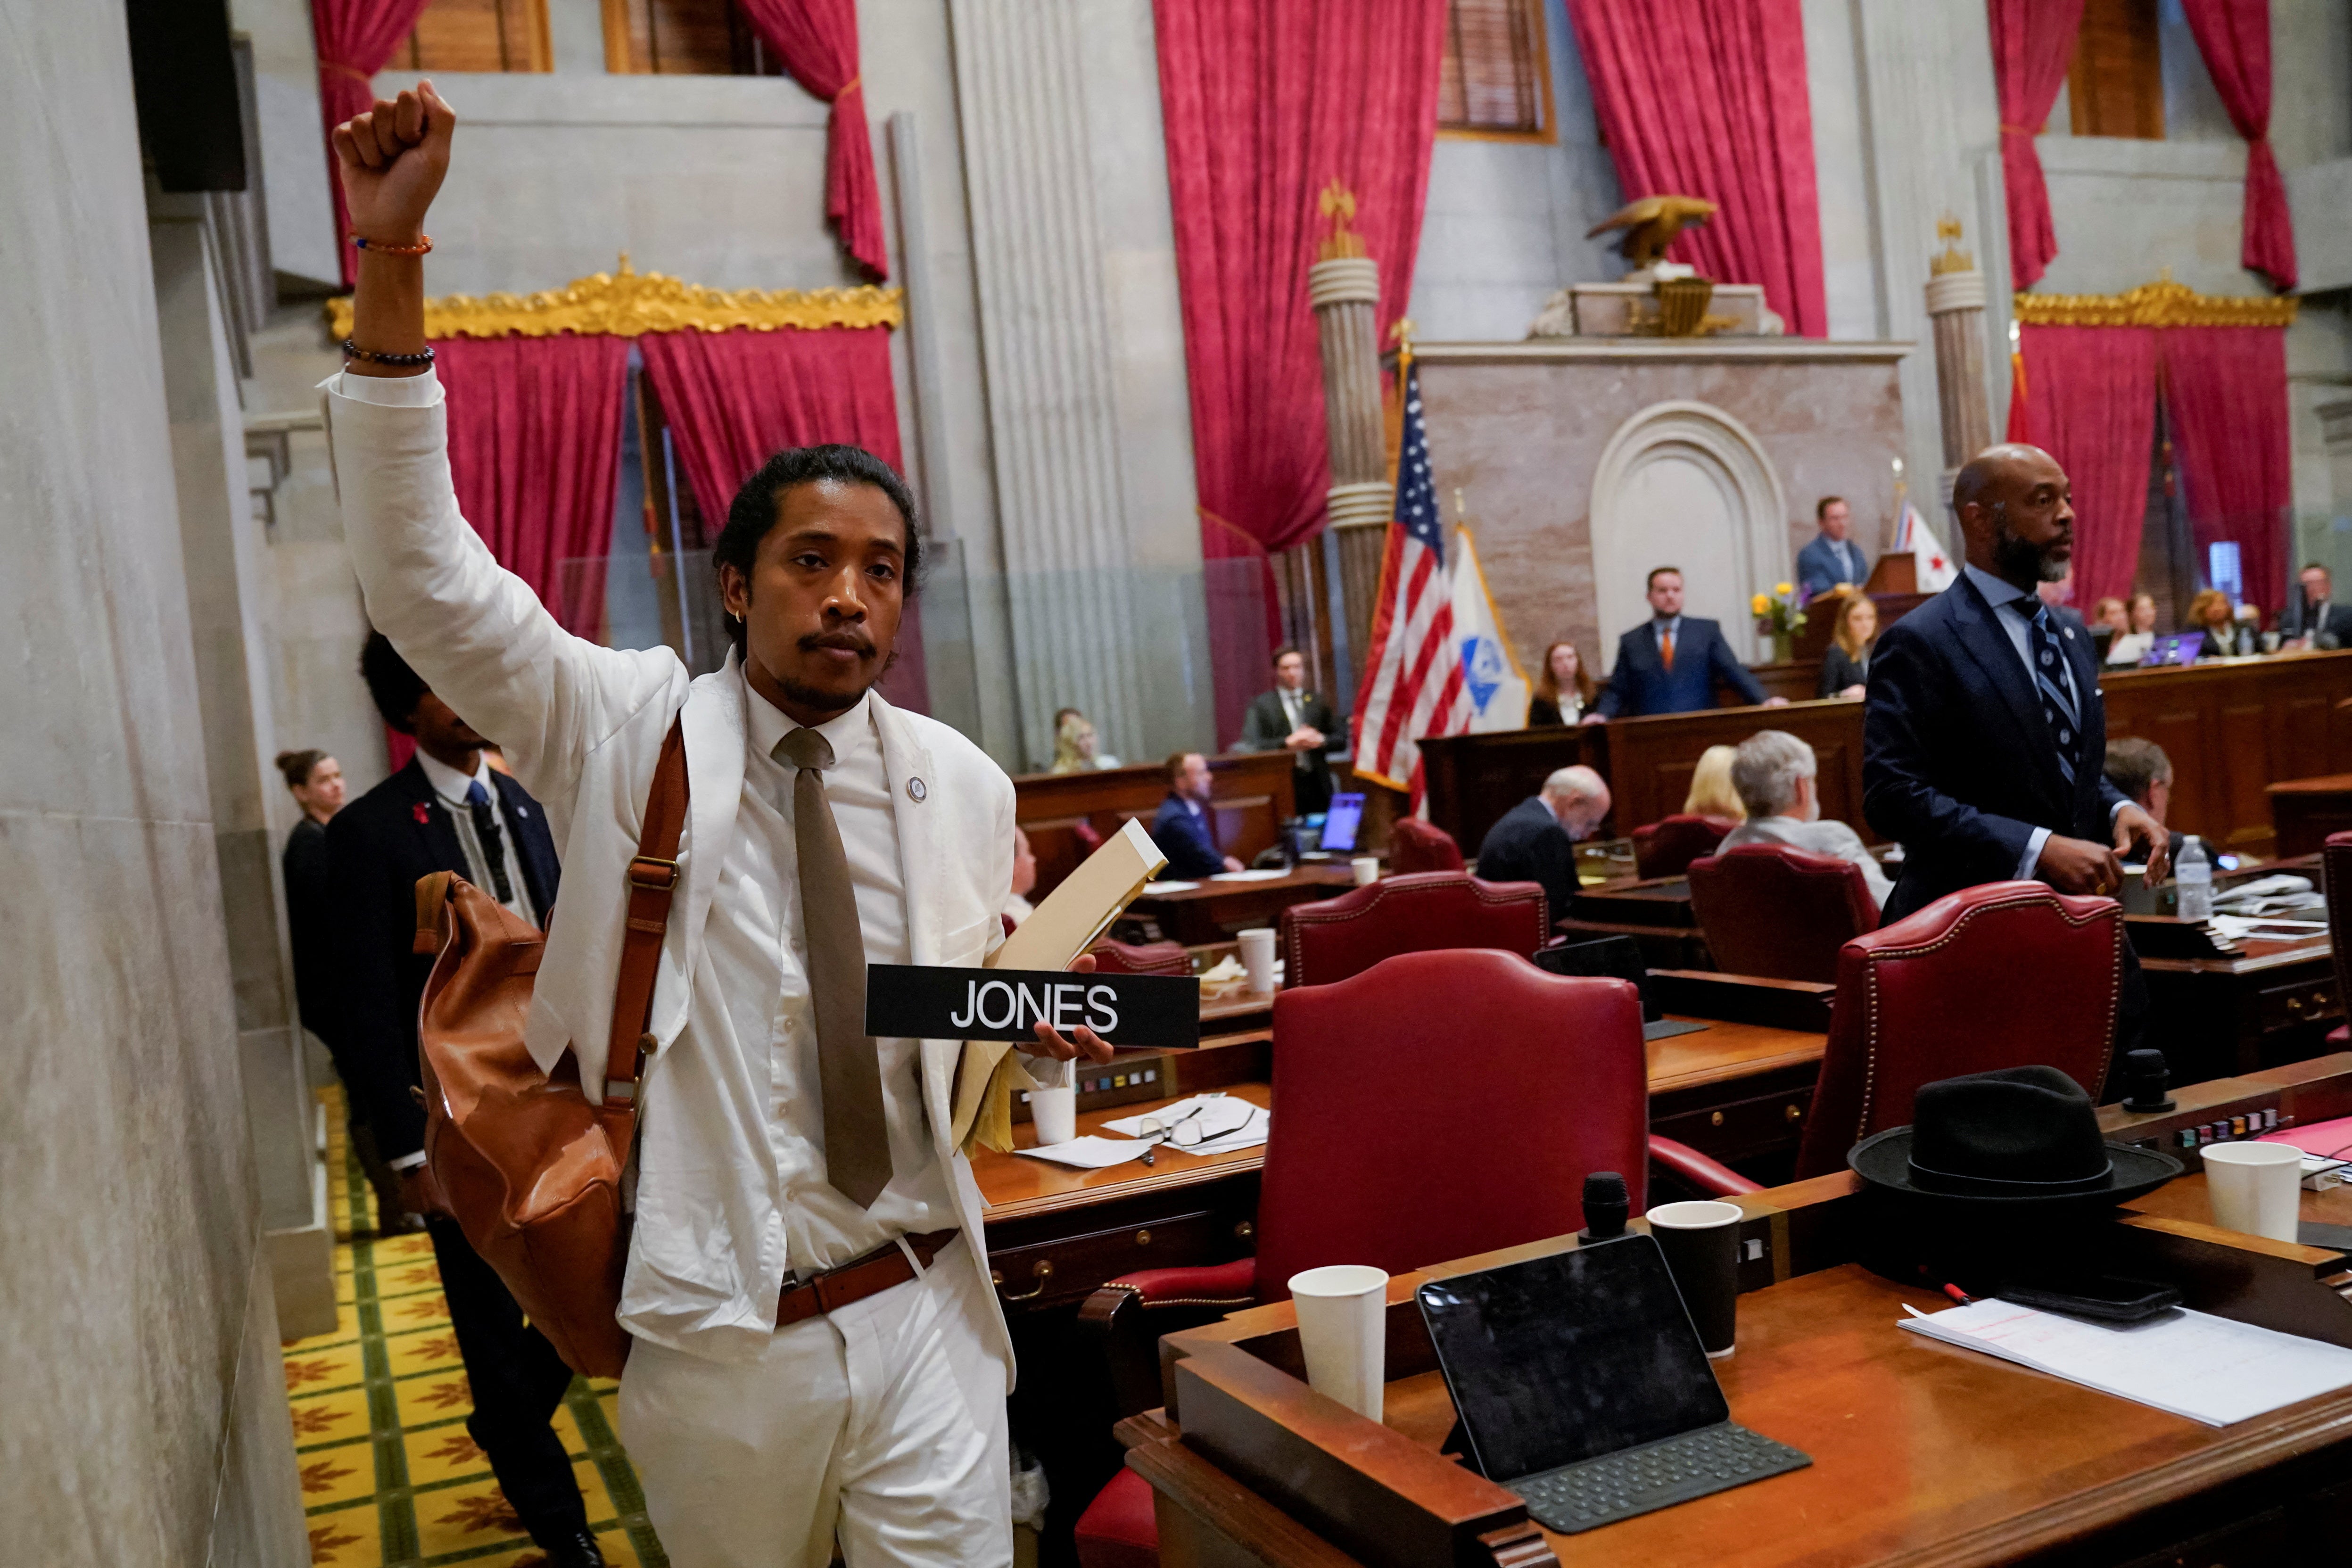 Justin Jones carries his name tag after a vote at the Tennessee House of Representatives to expel him for his role in a gun control demonstration at the statehouse last week